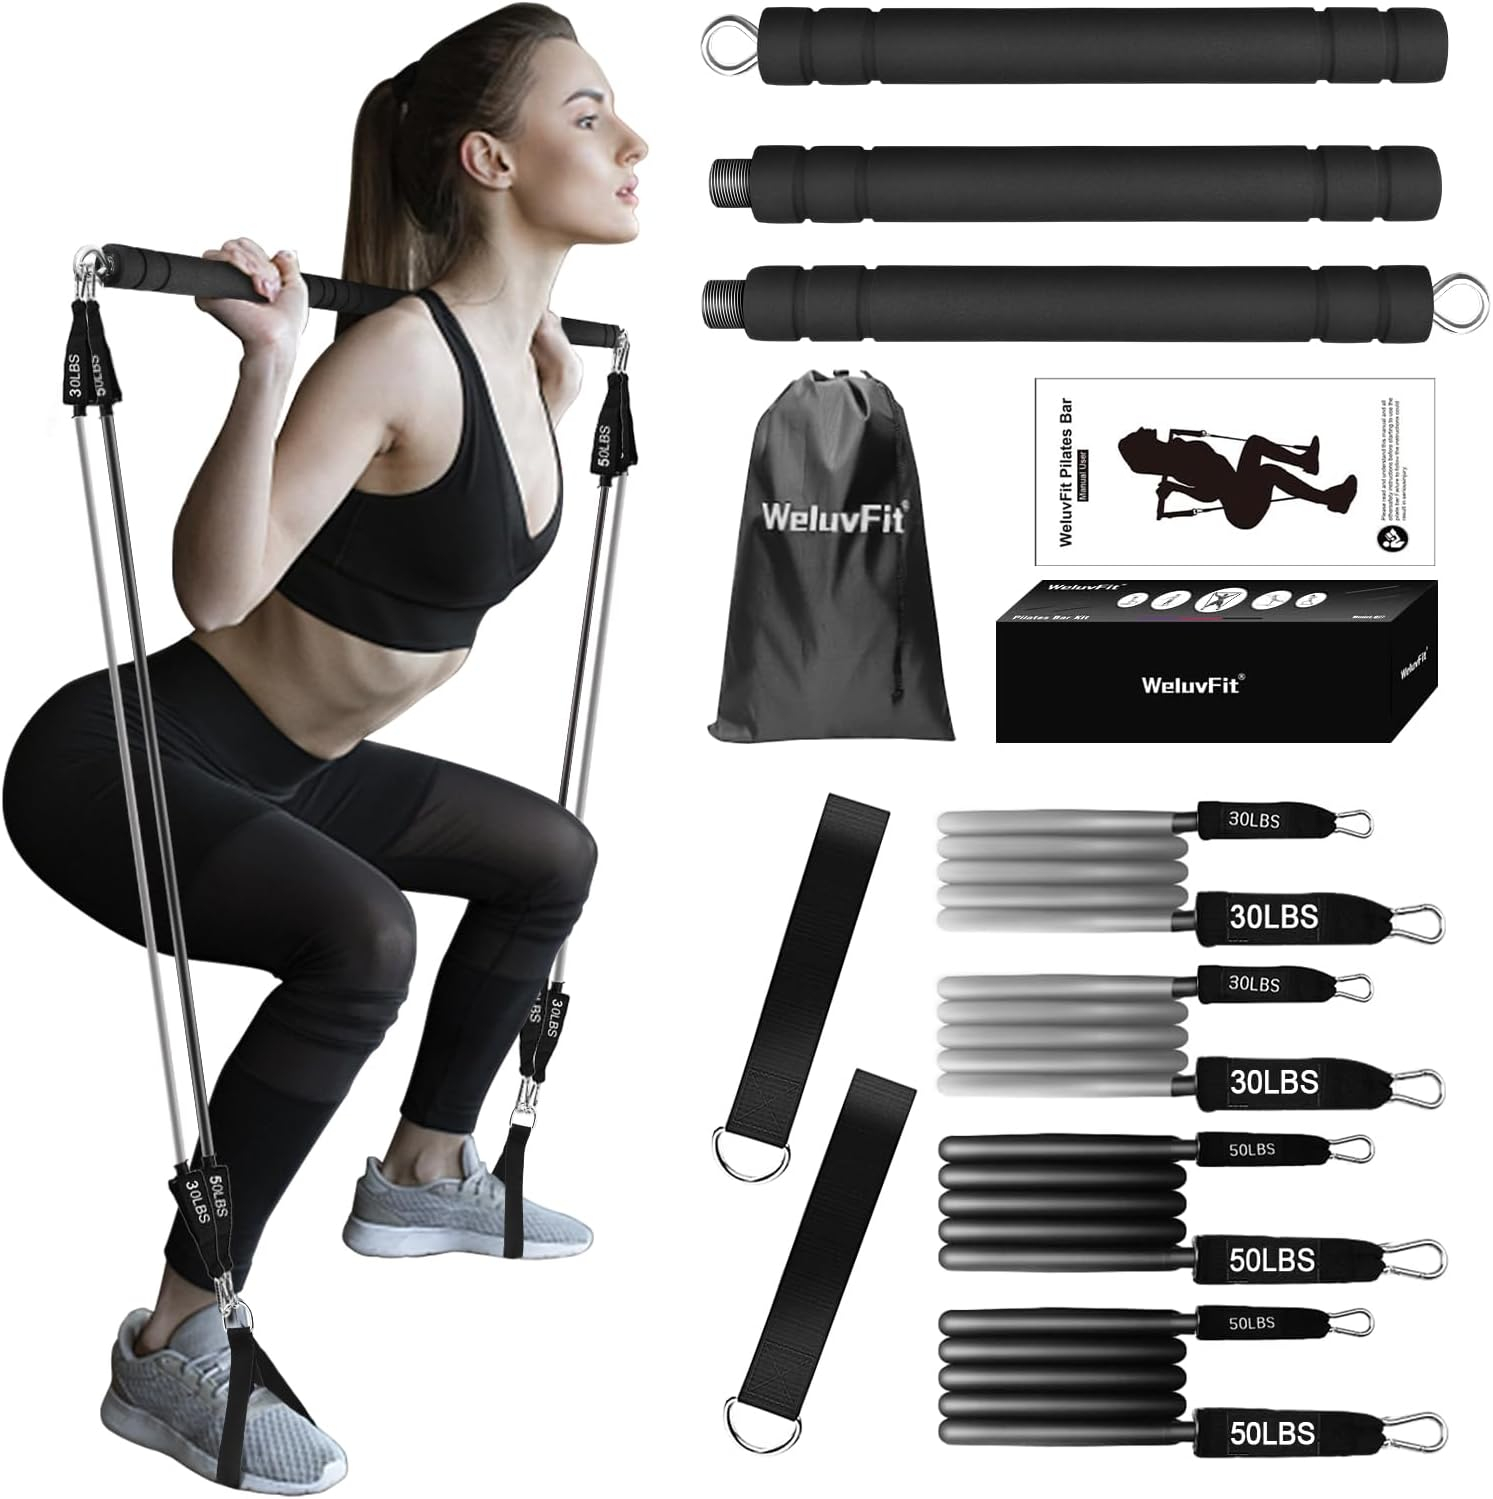 WeluvFit Pilates Bar Kit with Resistance Bands, Exercise Fitness Equipment for Women  Men, Home Gym Workouts Stainless Steel Stick Squat Yoga Pilates Flexbands Kit for Full Body Shaping